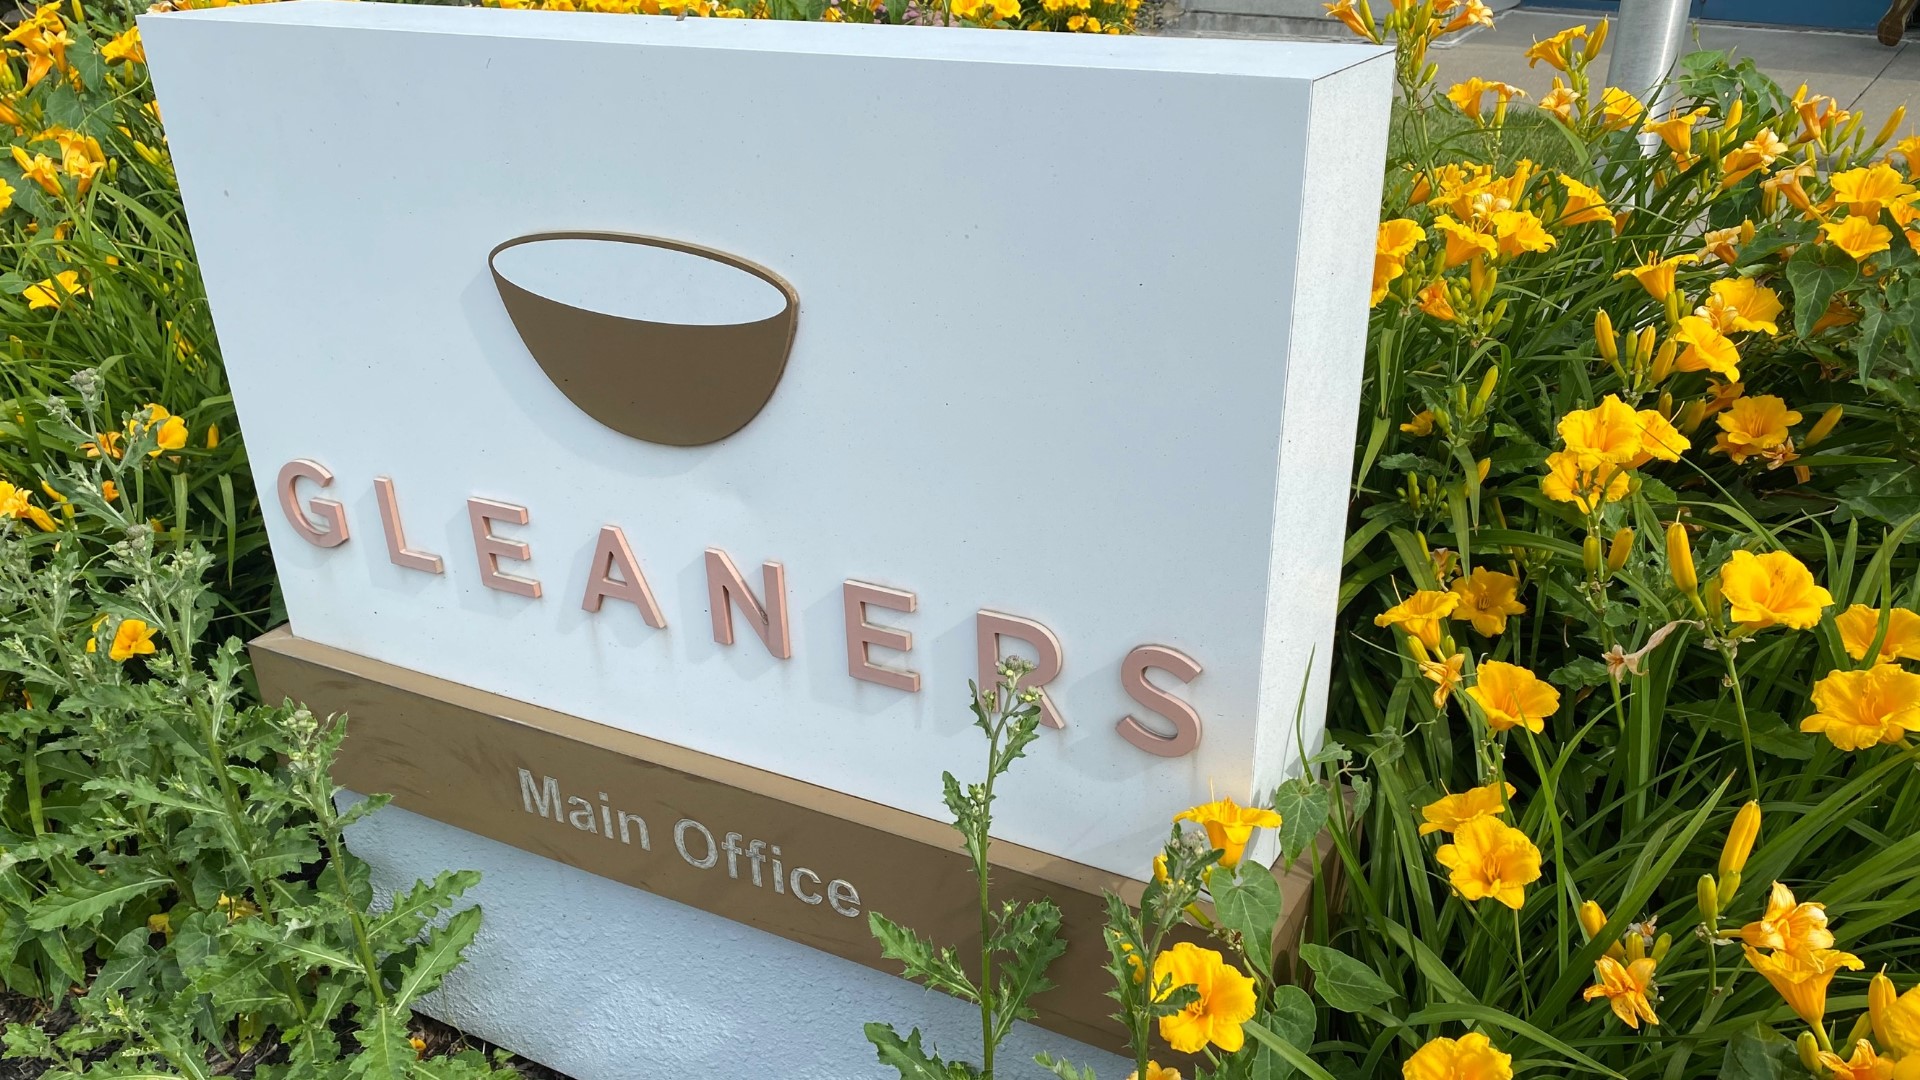 Gleaners evacuated the building after the threats Sept. 22 and canceled distribution at the Community Cupboard.